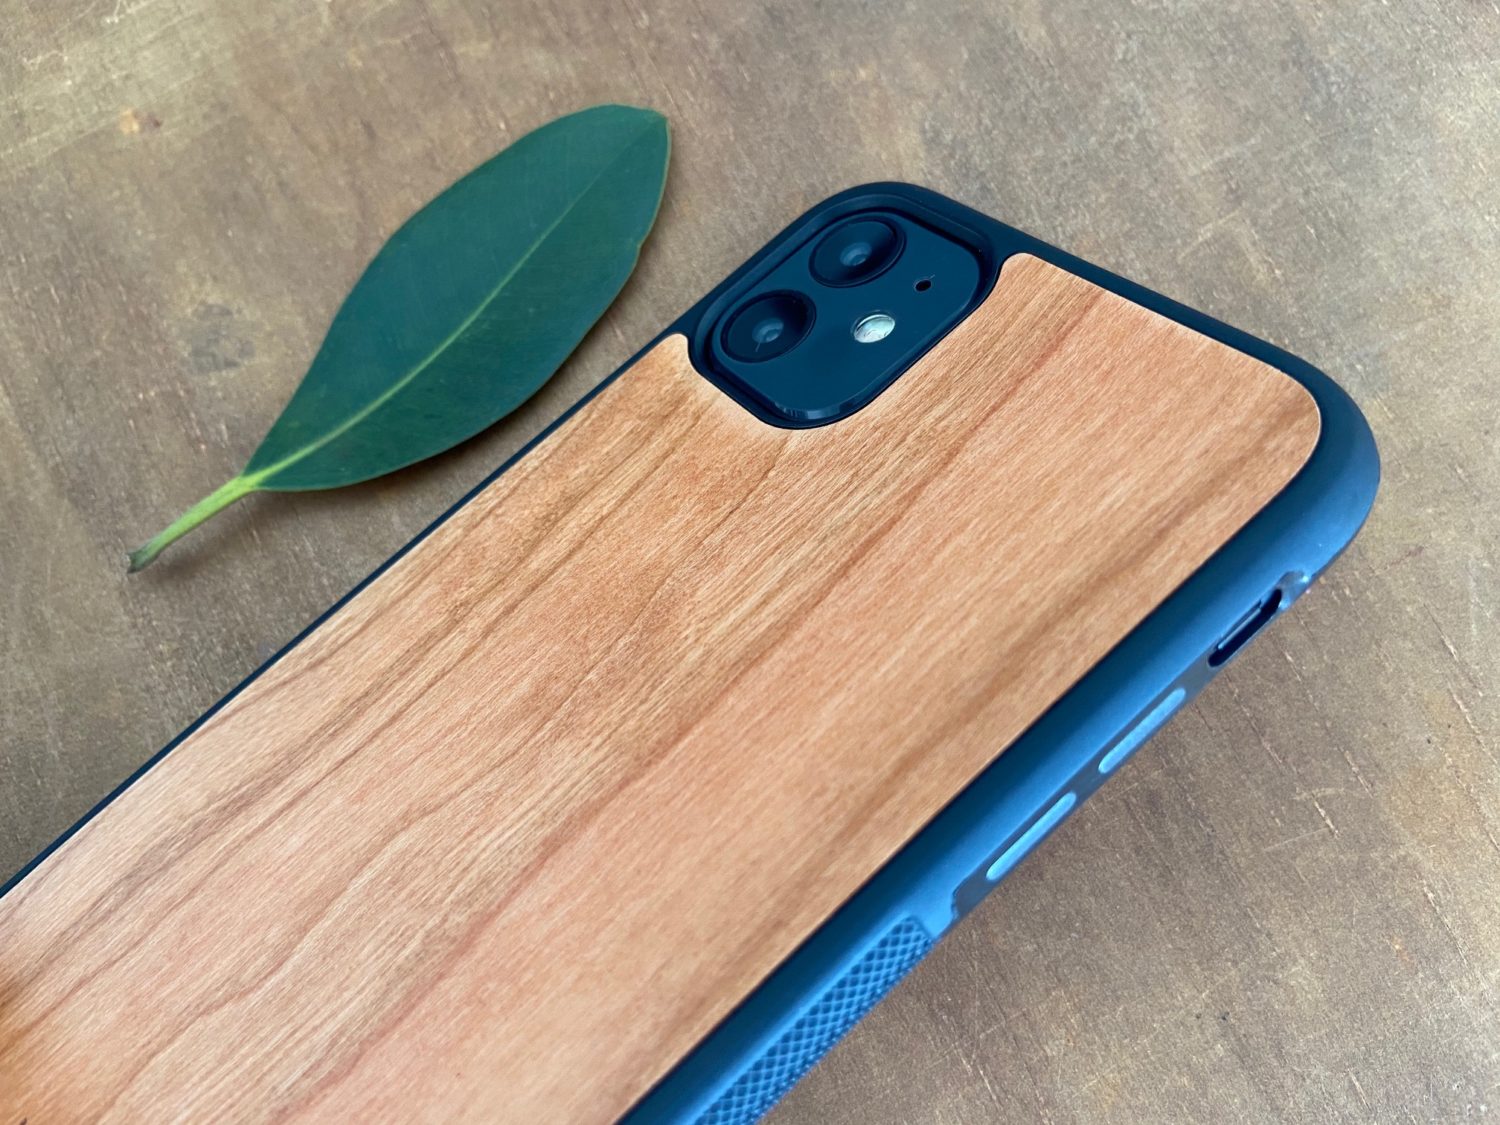 A sleek phone case made from real wood